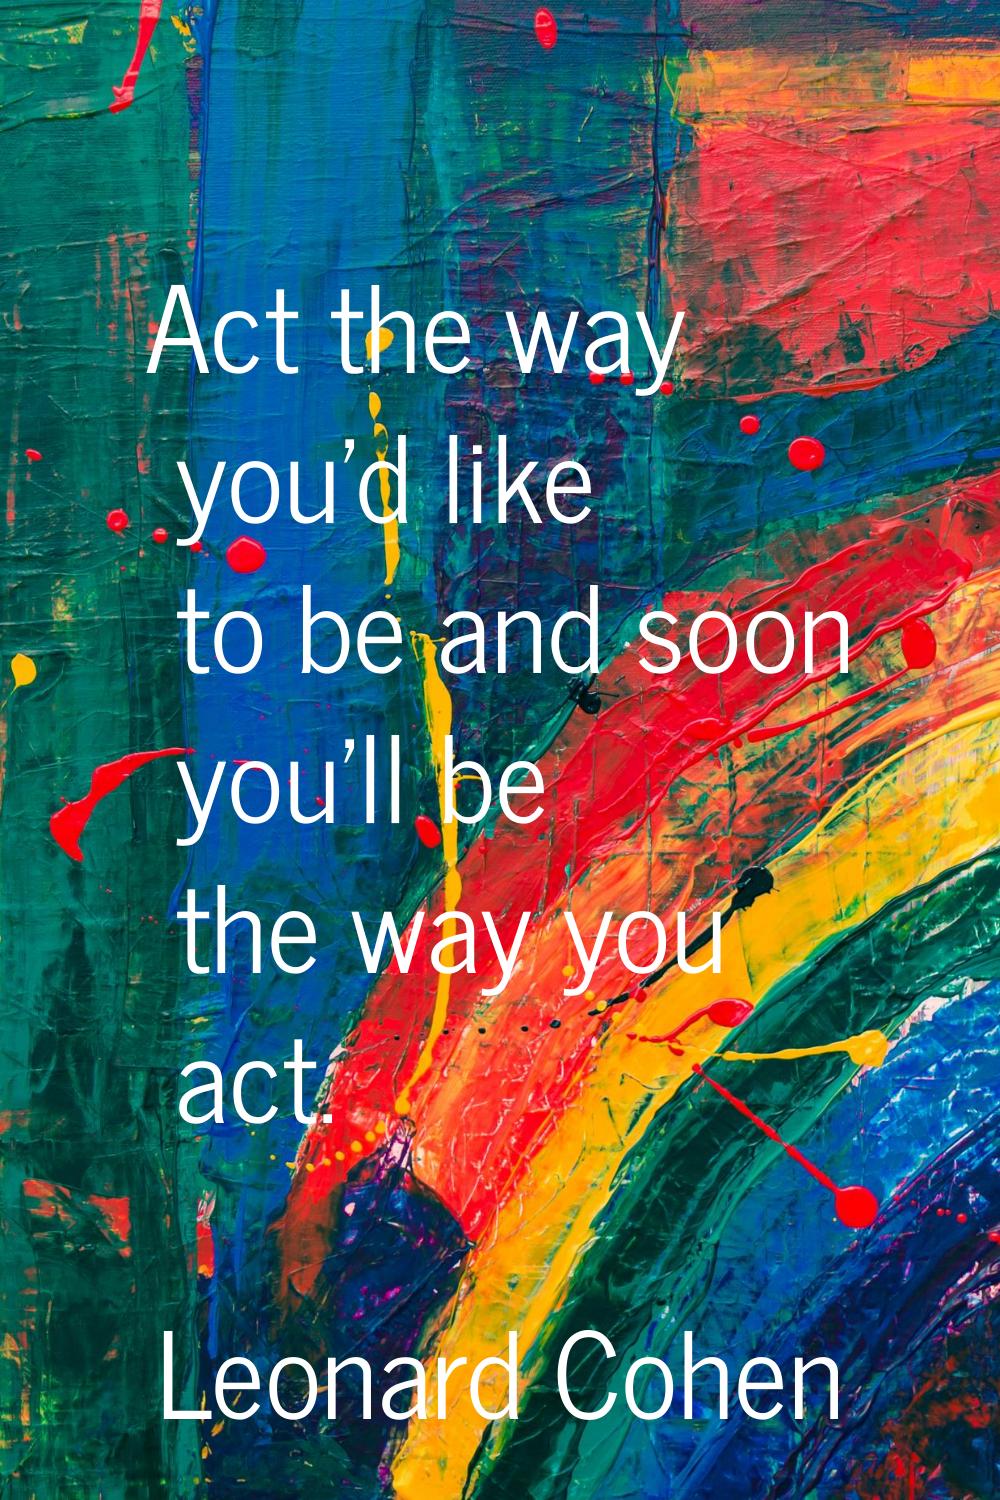 Act the way you'd like to be and soon you'll be the way you act.